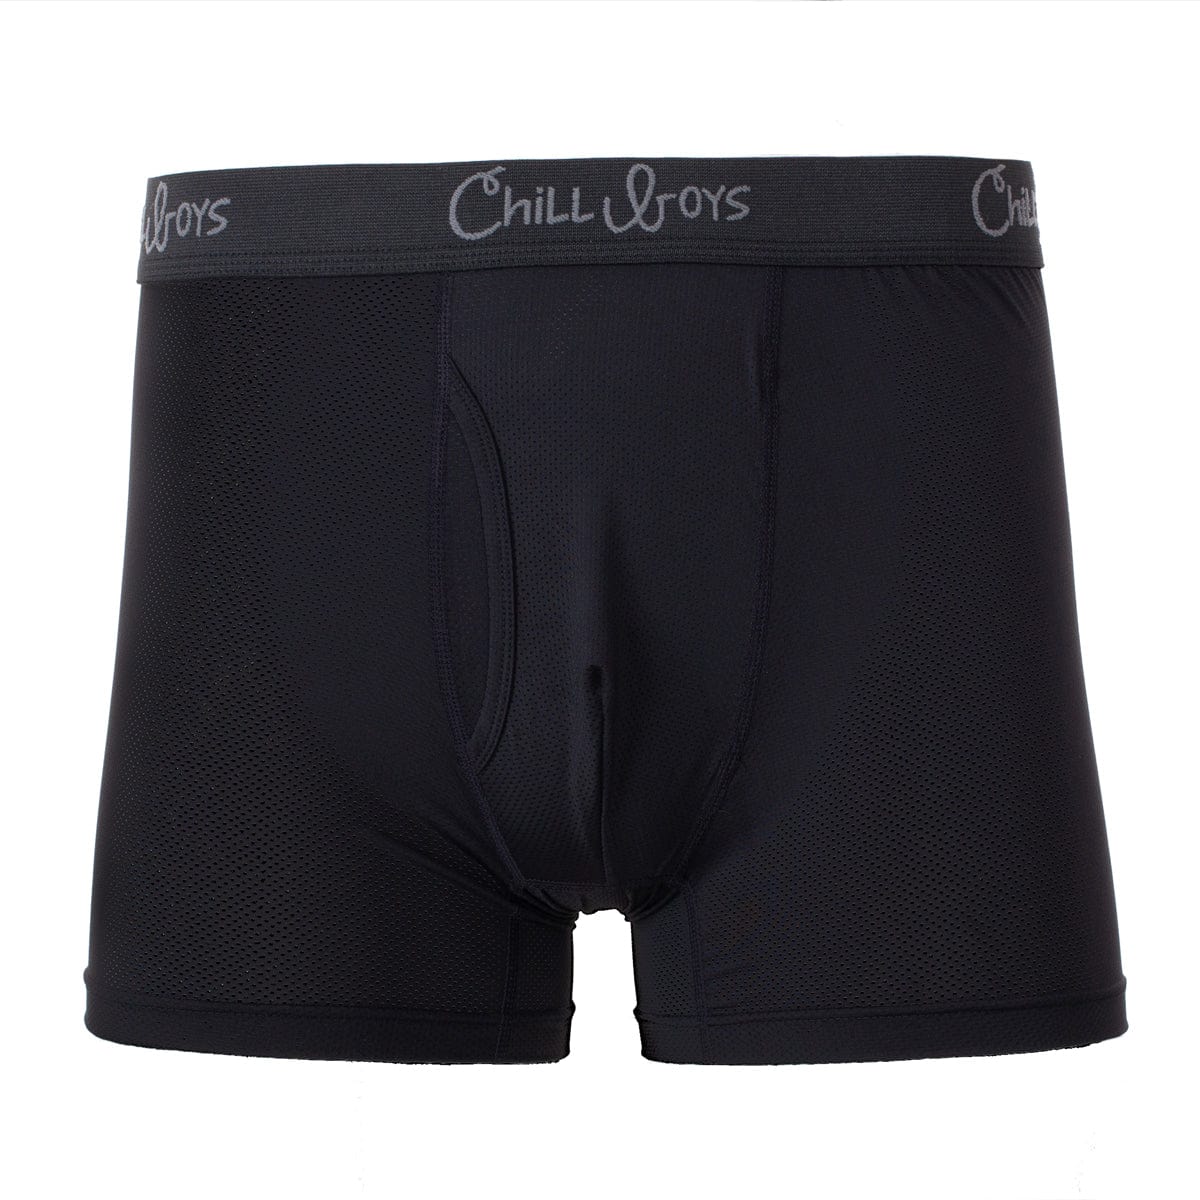 Onyx Black - Chill Boys Soft Stretch, Quick-Dry Trunks - front view